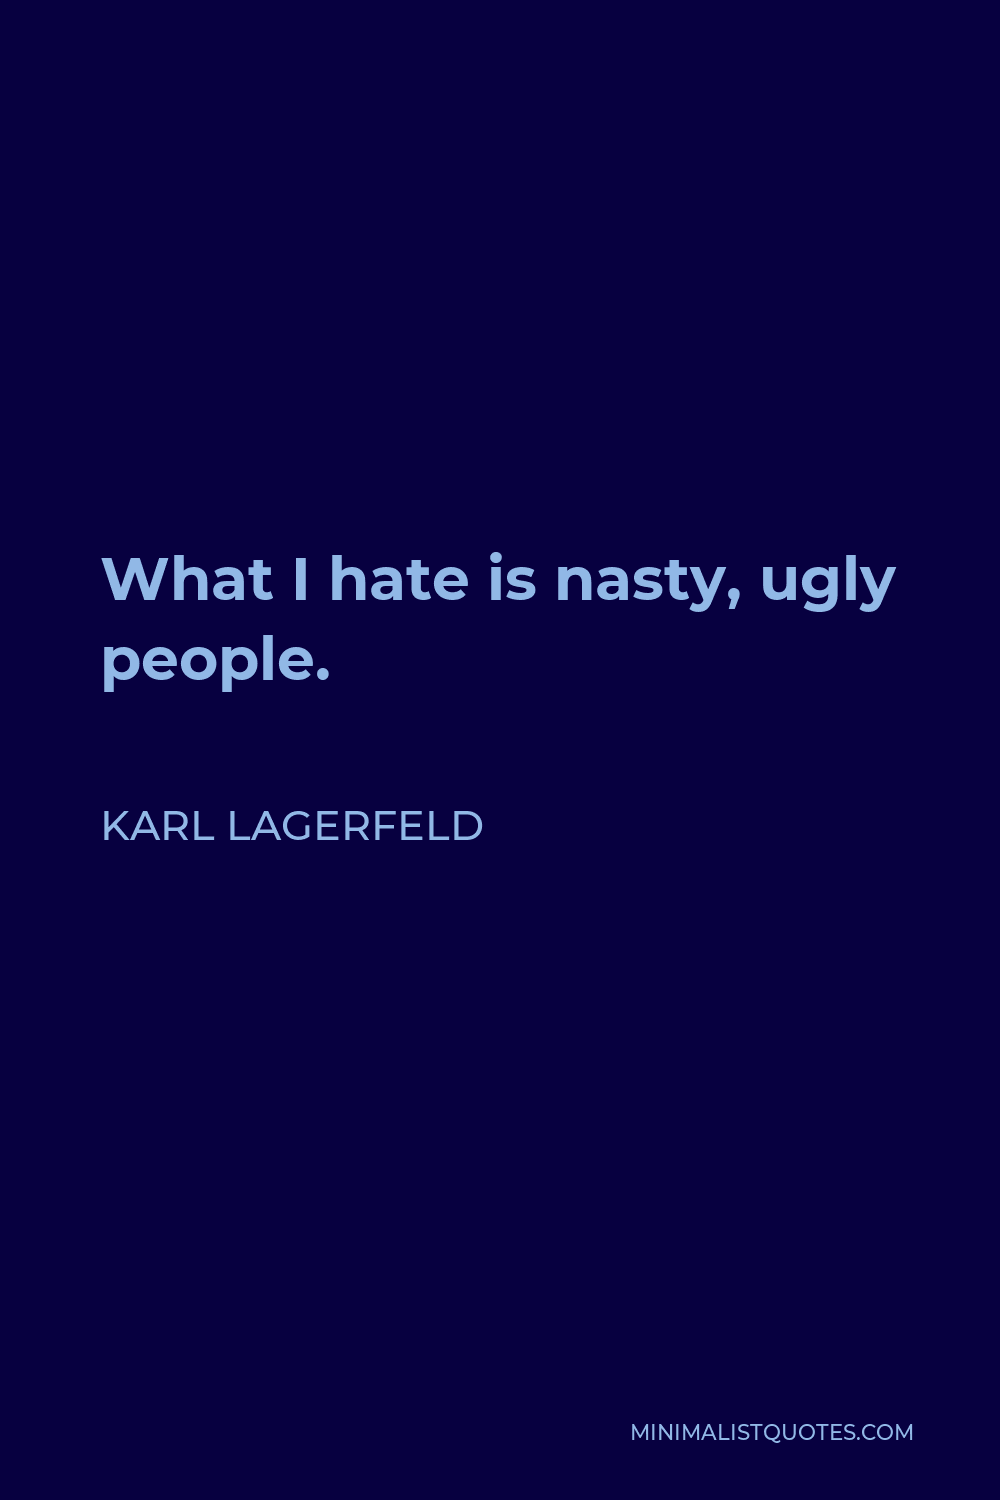 Karl Lagerfeld Quote - What I hate is nasty, ugly people.